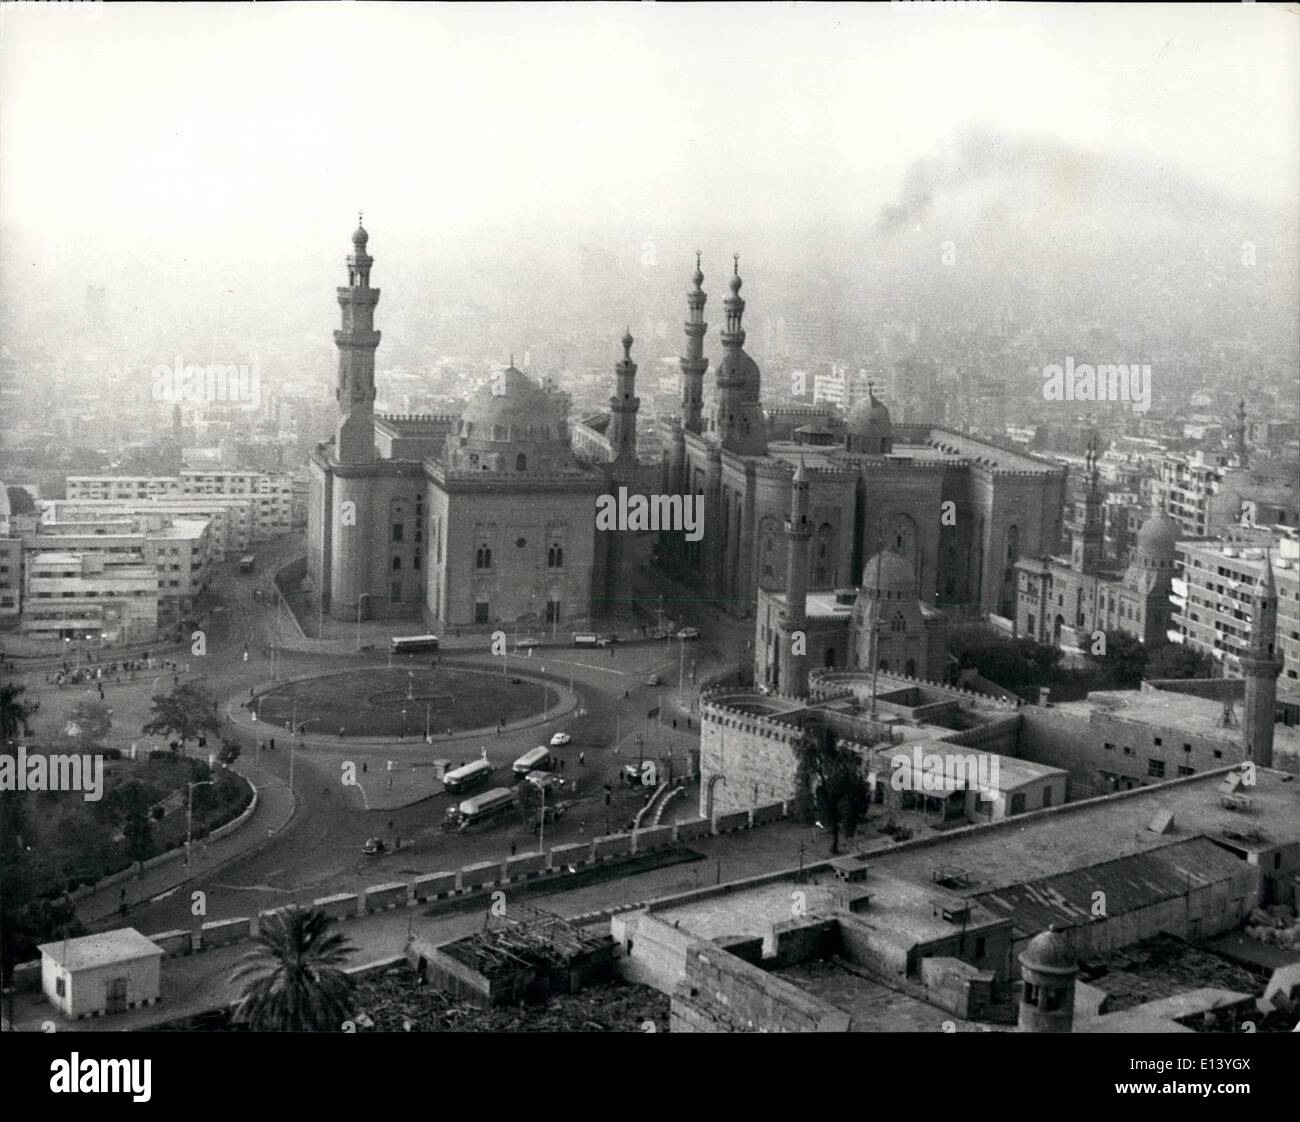 Mar. 27, 2012 - Al Azhar University, Cairo: The Respledent-stronghold of Islam - lies in the heart of Cairo. It is surrounded by the old popular quarters of the city. Stock Photo